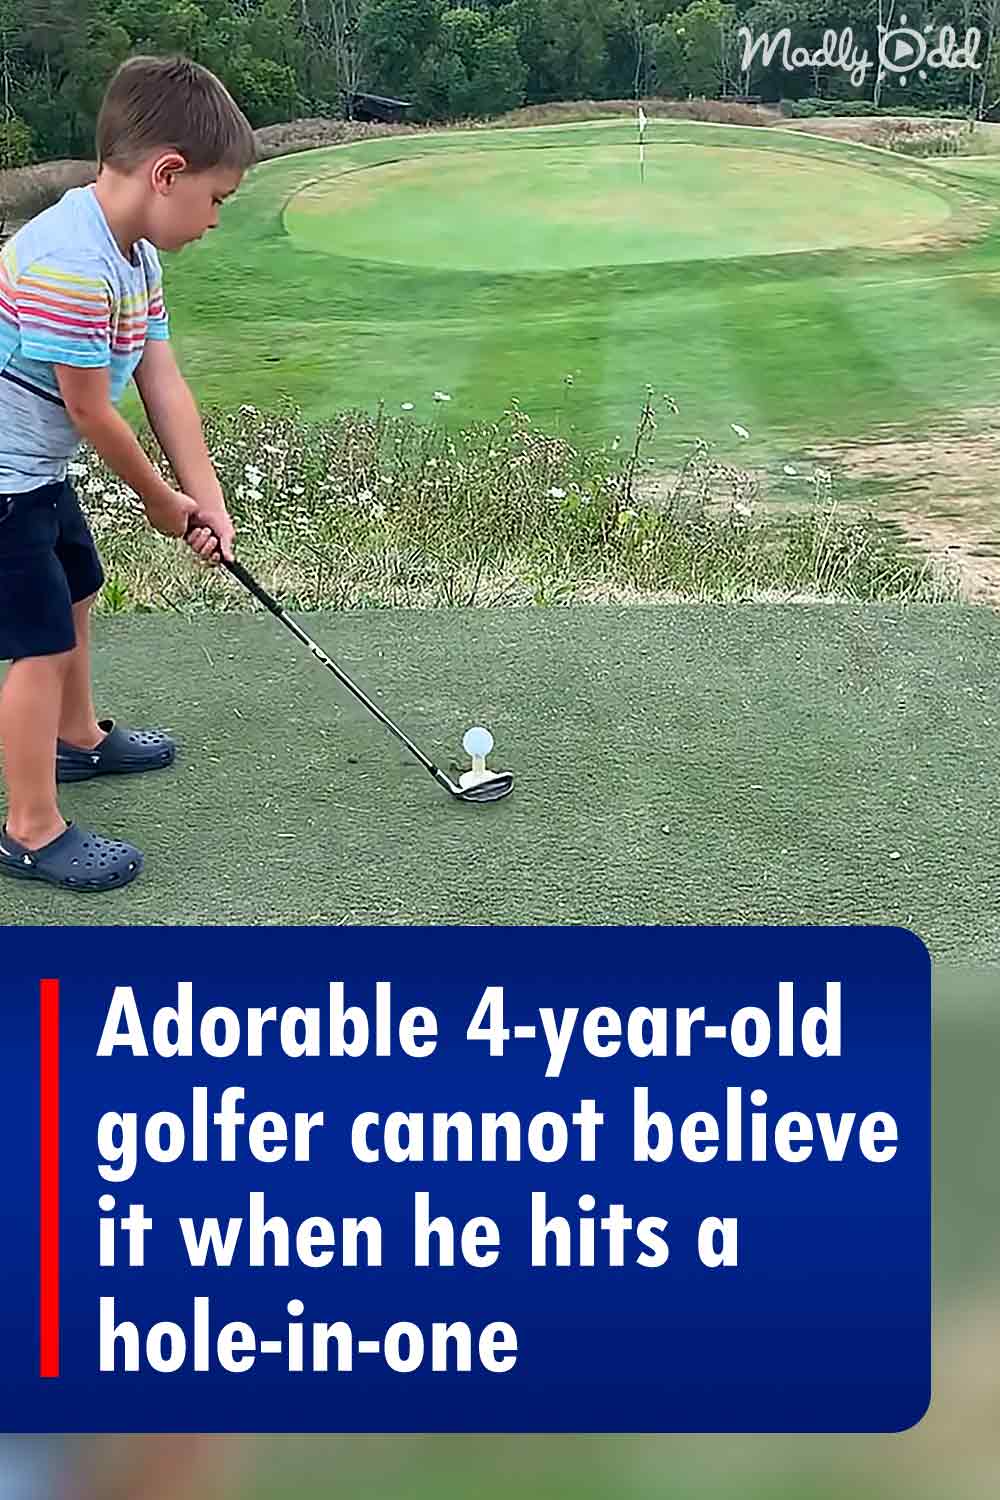 Adorable 4-year-old golfer cannot believe it when he hits a hole-in-one